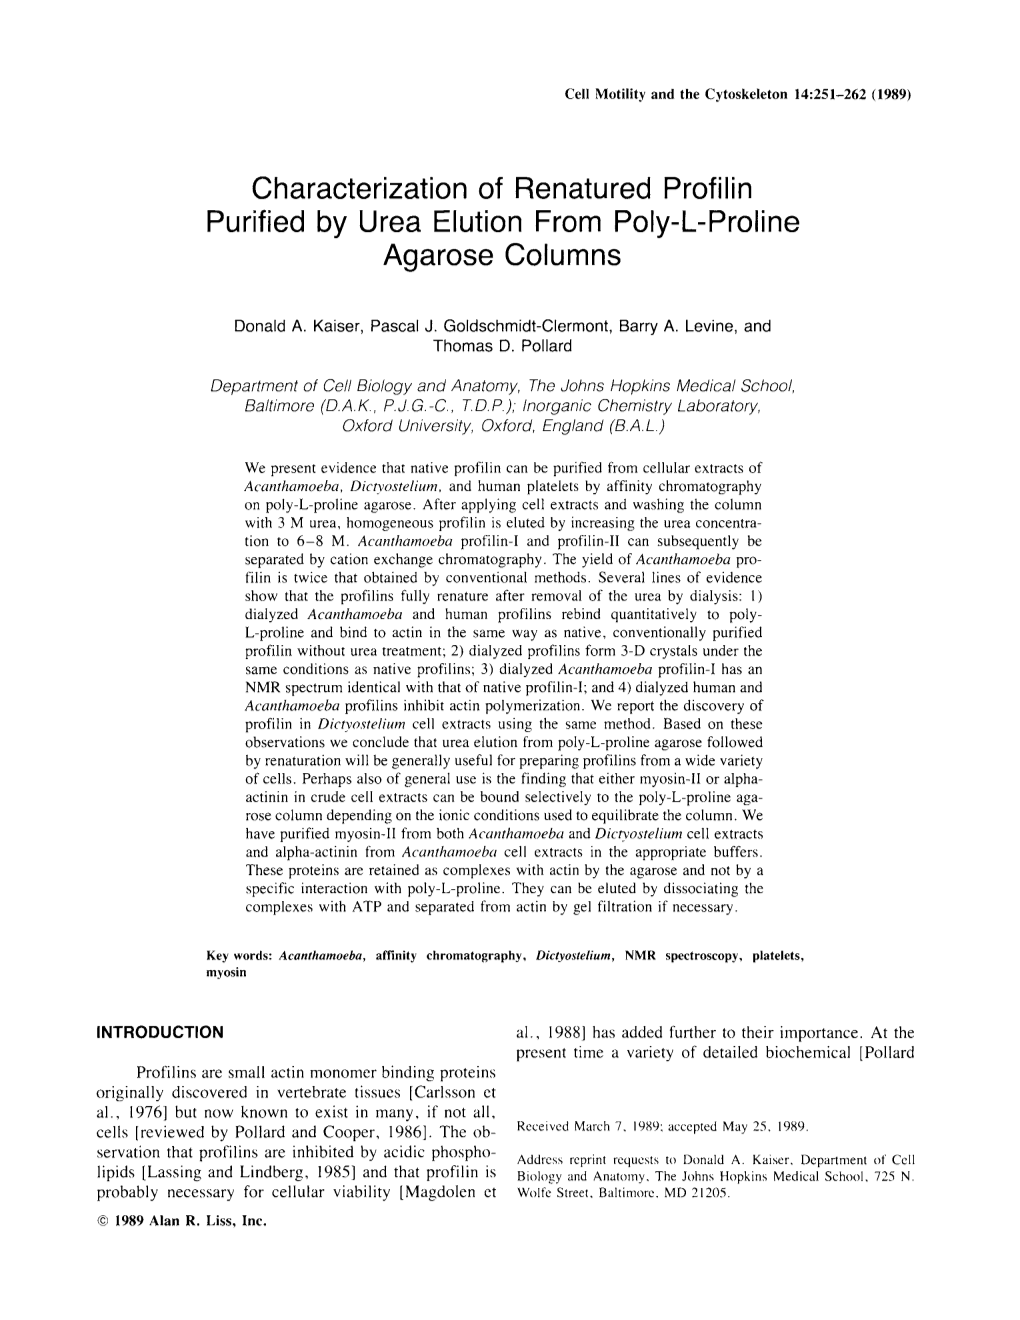 Characterization of Renatured Profilin Purified by Urea Elution from Poly-L